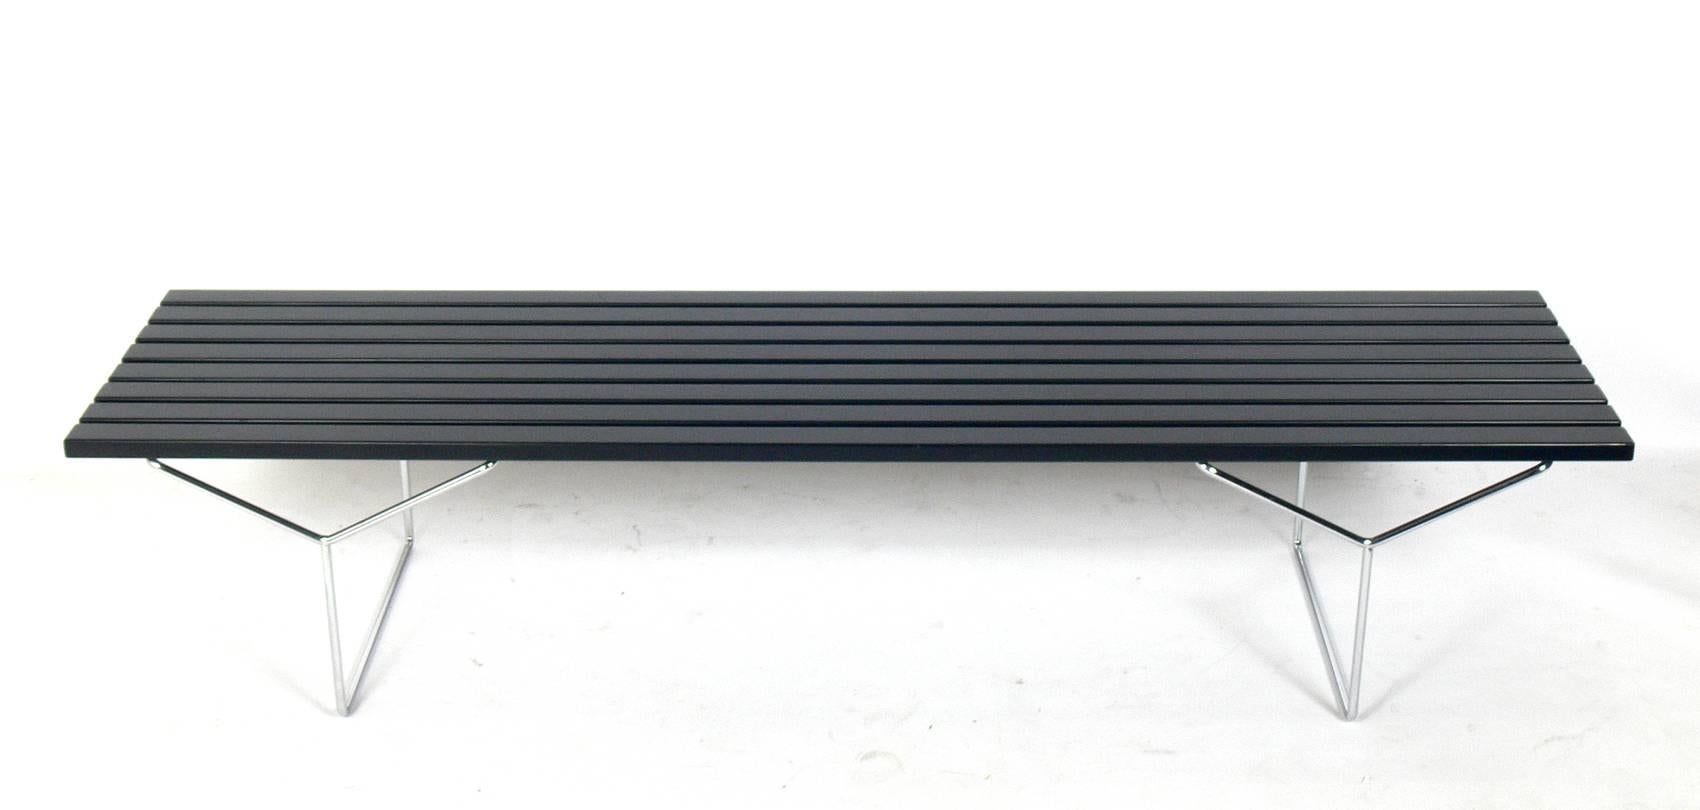 Slat bench or coffee table, designed by Harry Bertoia for Knoll, American, circa 1970s. The wood slats are currently being refinished and can be completed in your choice of color. The chrome legs have been hand polished.